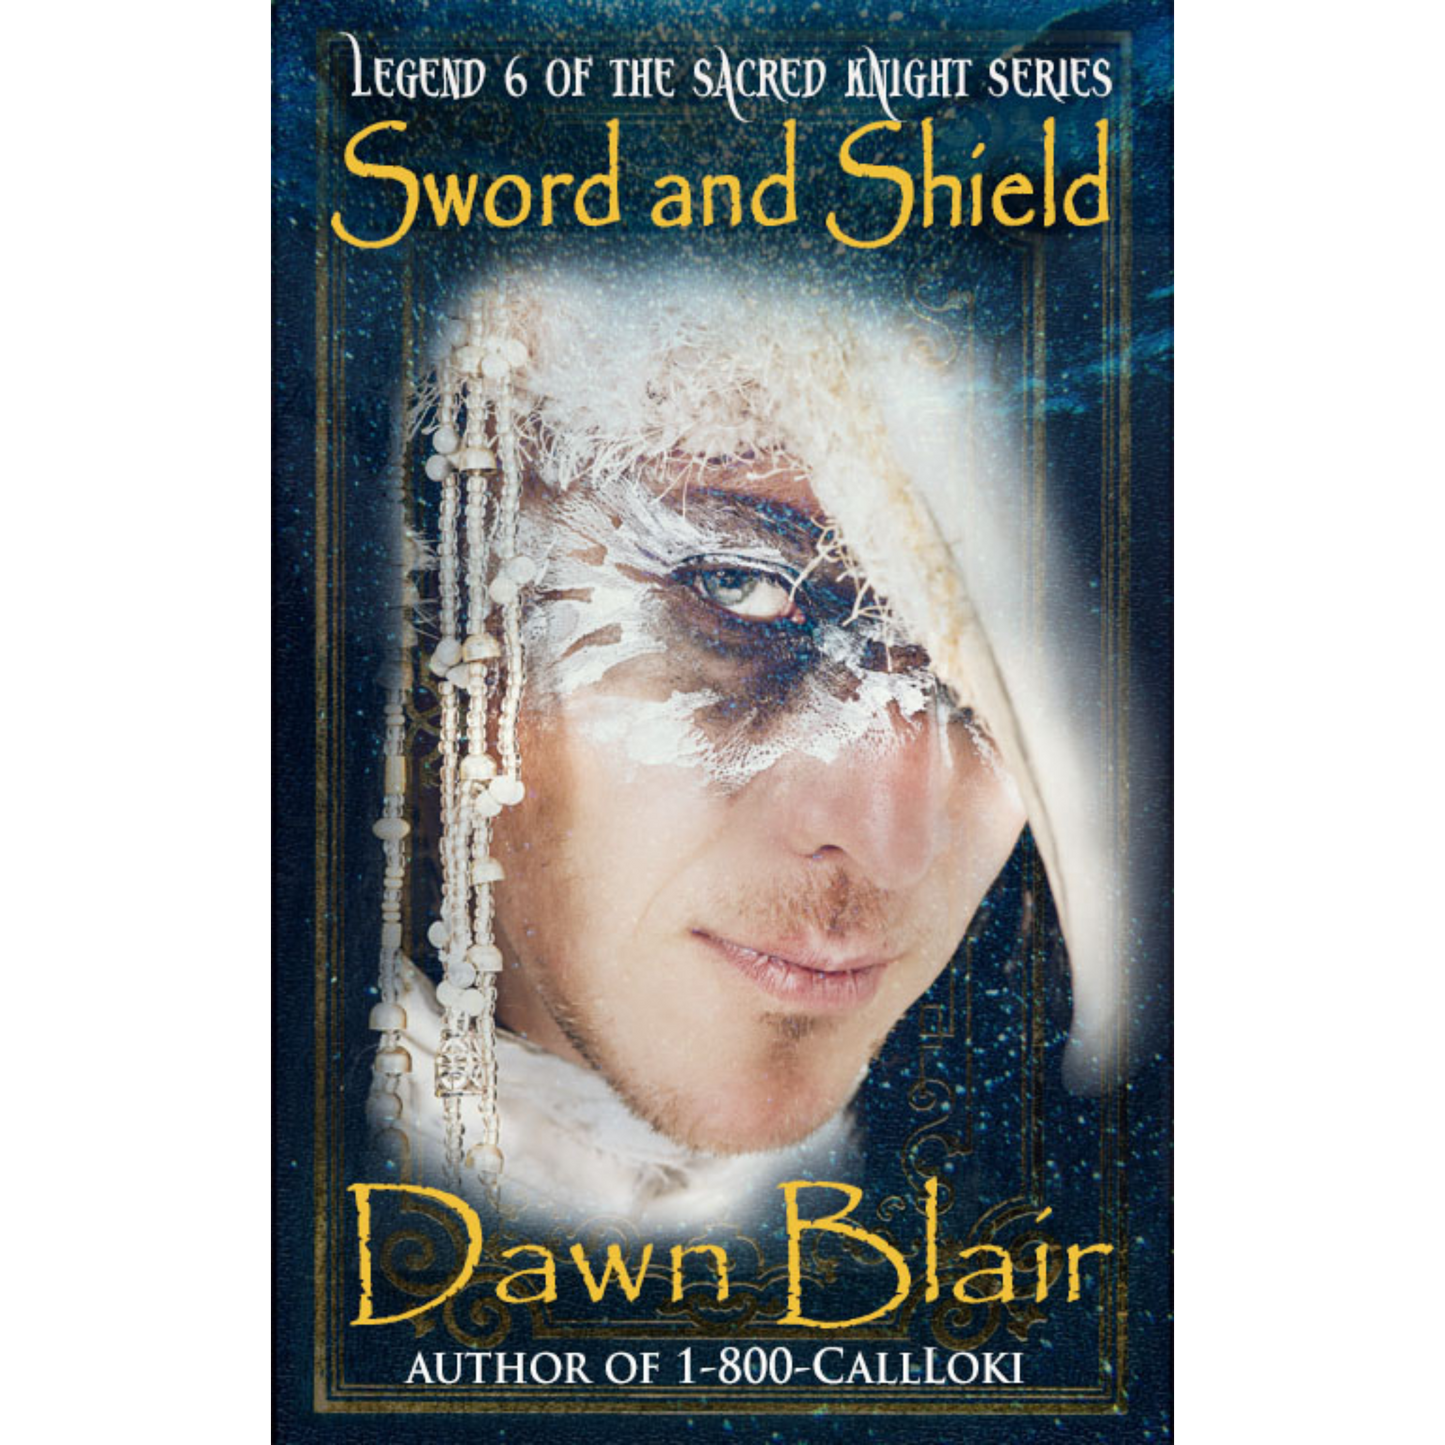 Sword and Shield (Legend 6 of the Sacred Knight series)